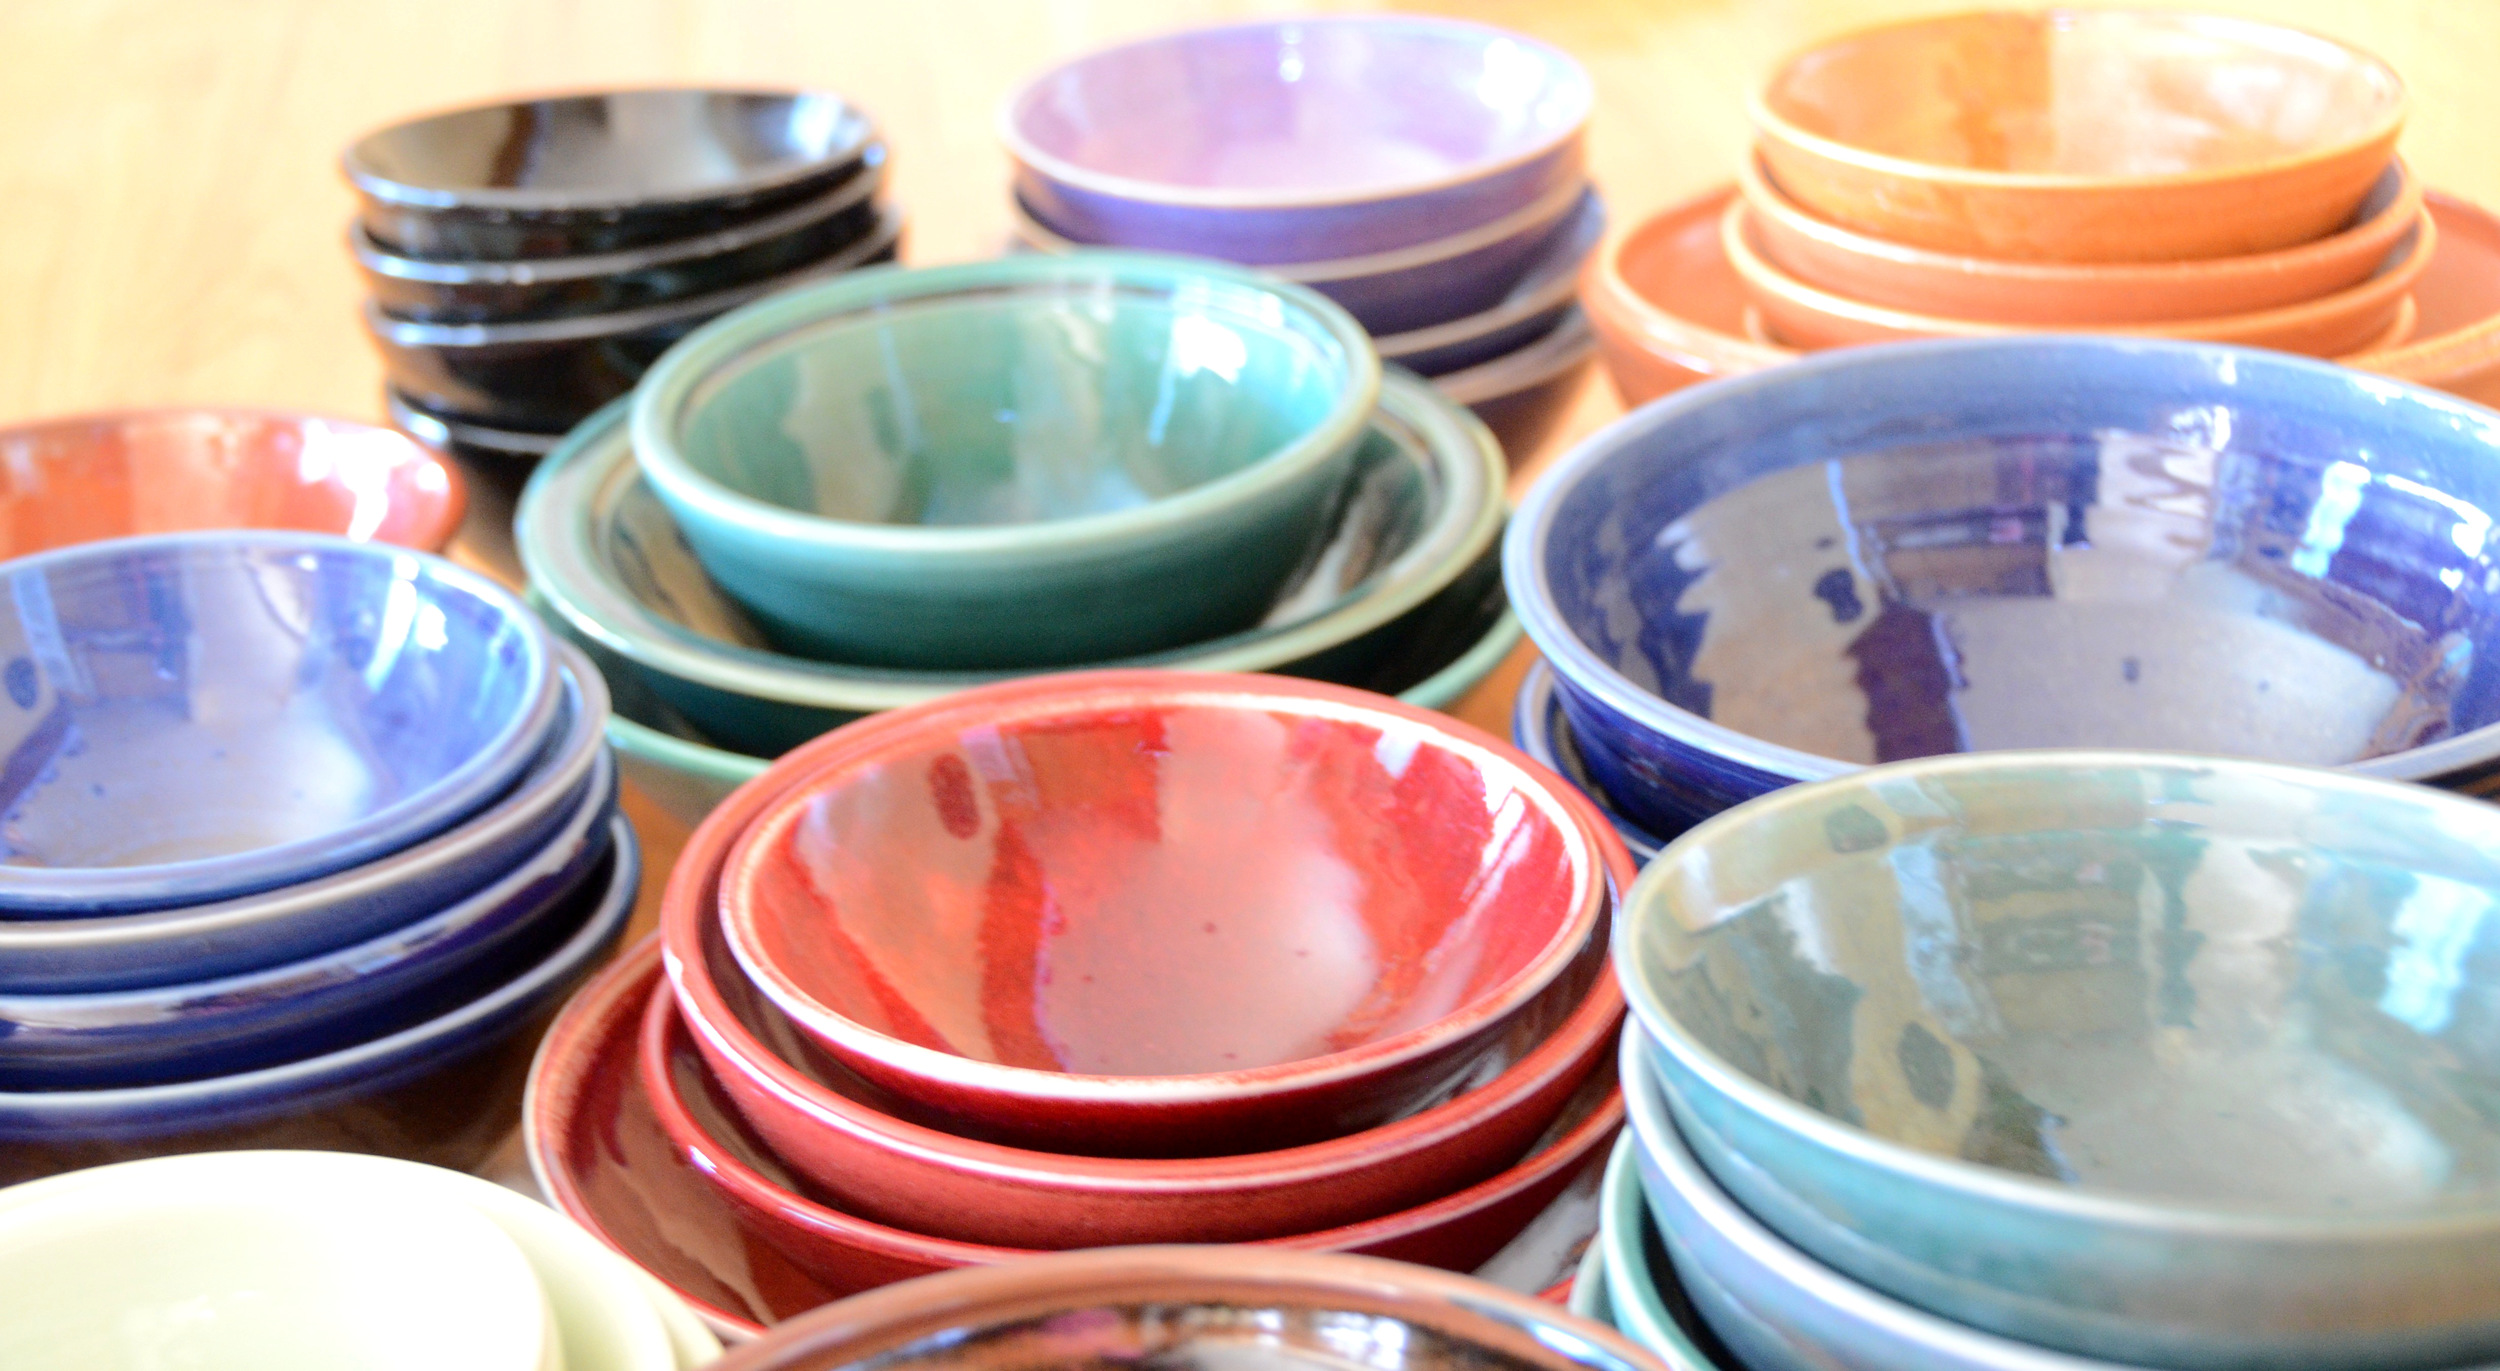 Porcelain Bowl Sets | Hand thrown porcelain on a potter's wheel.  High Fired, Cone 10, Assorted Colored Glazes, Hand Trimmed, Ceramic, Red, Green, Purple, Orange, Blue | Caldwell Pottery